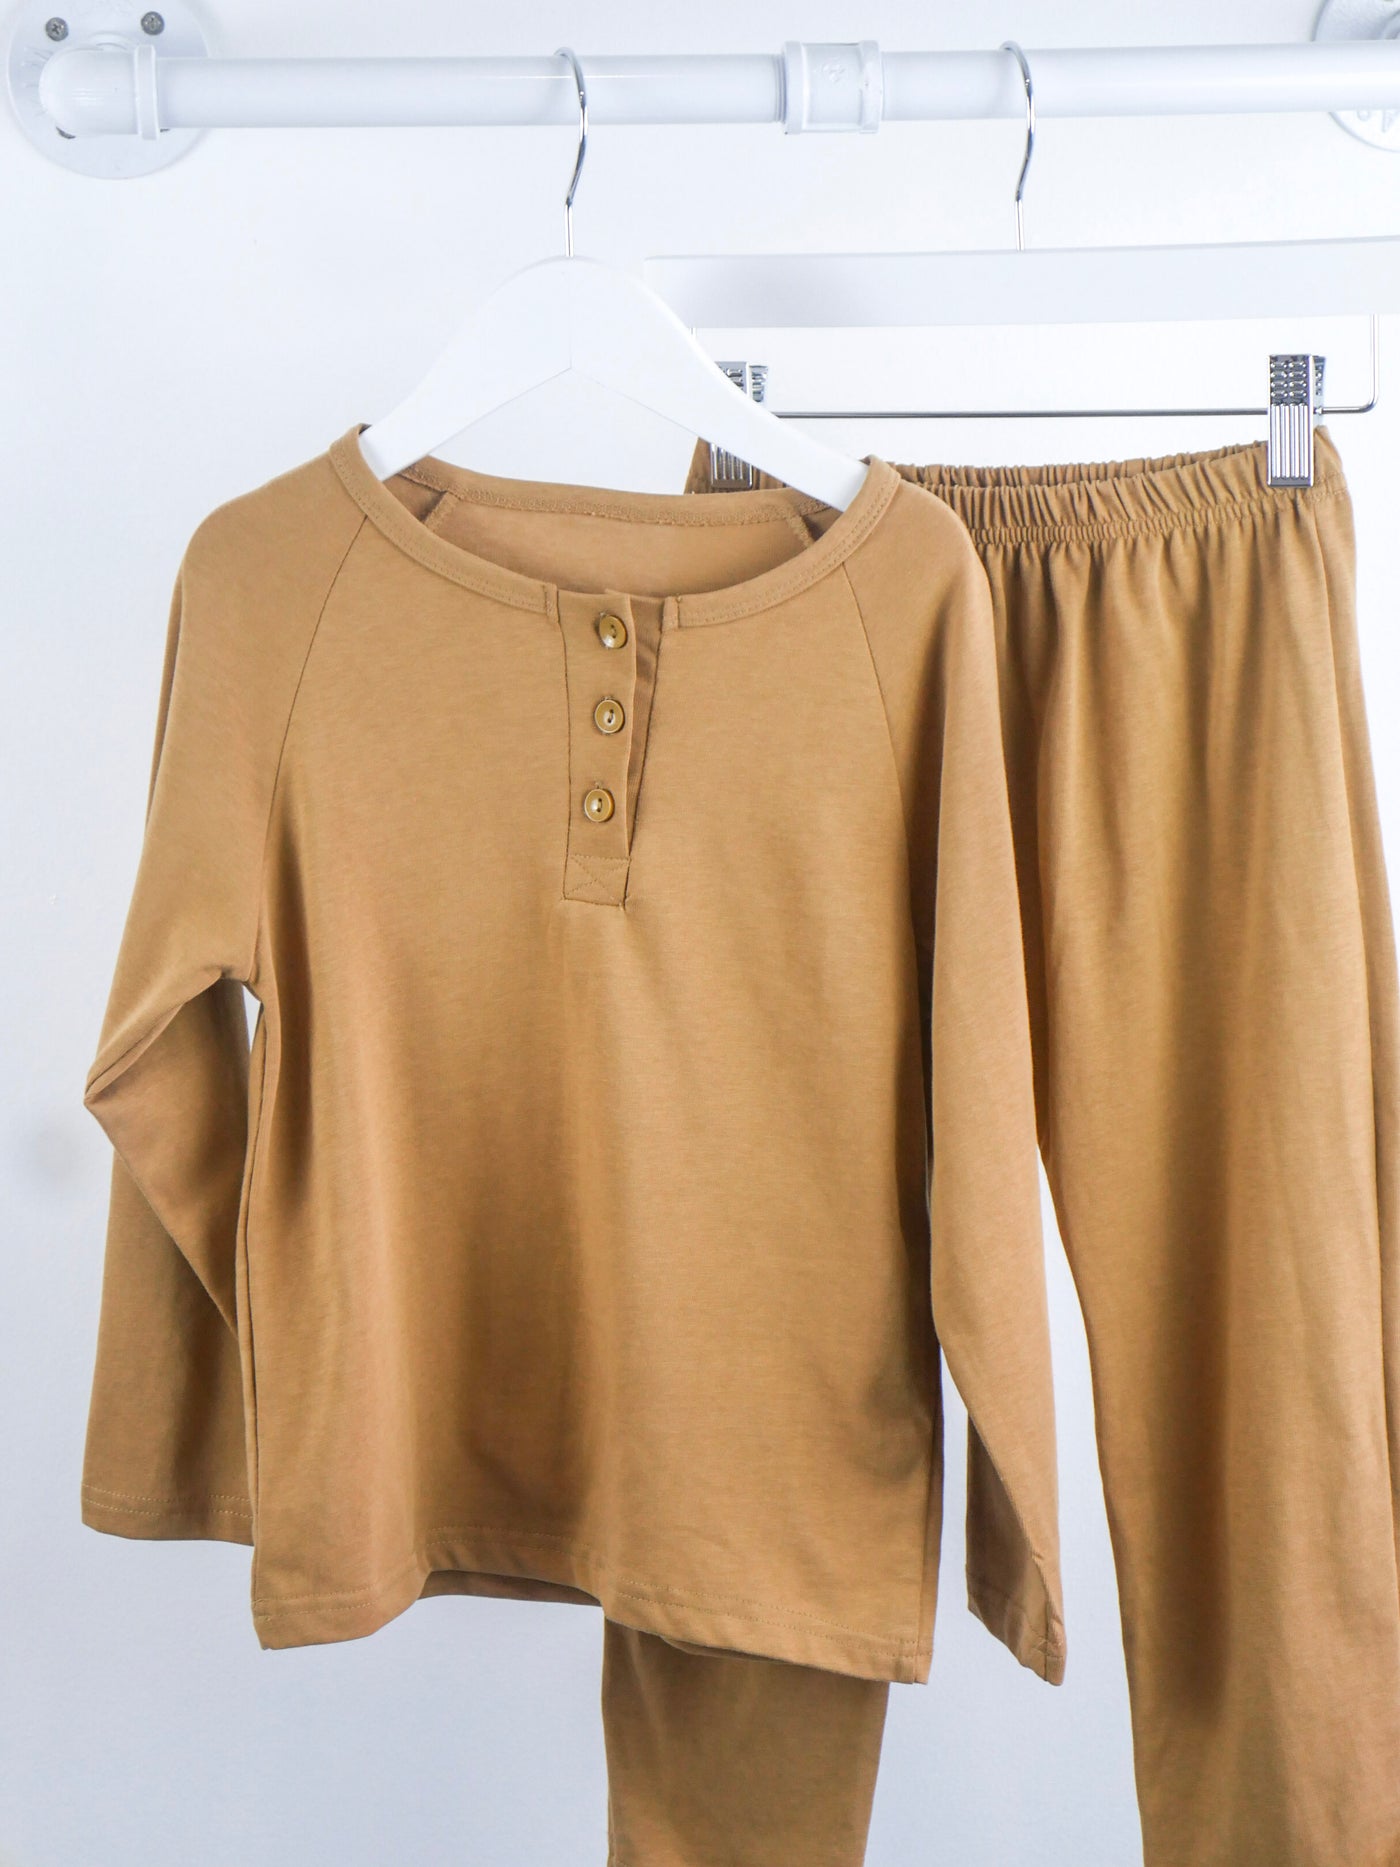 Carmel color long sleeve light weight shirt with matching pants with elastic waist